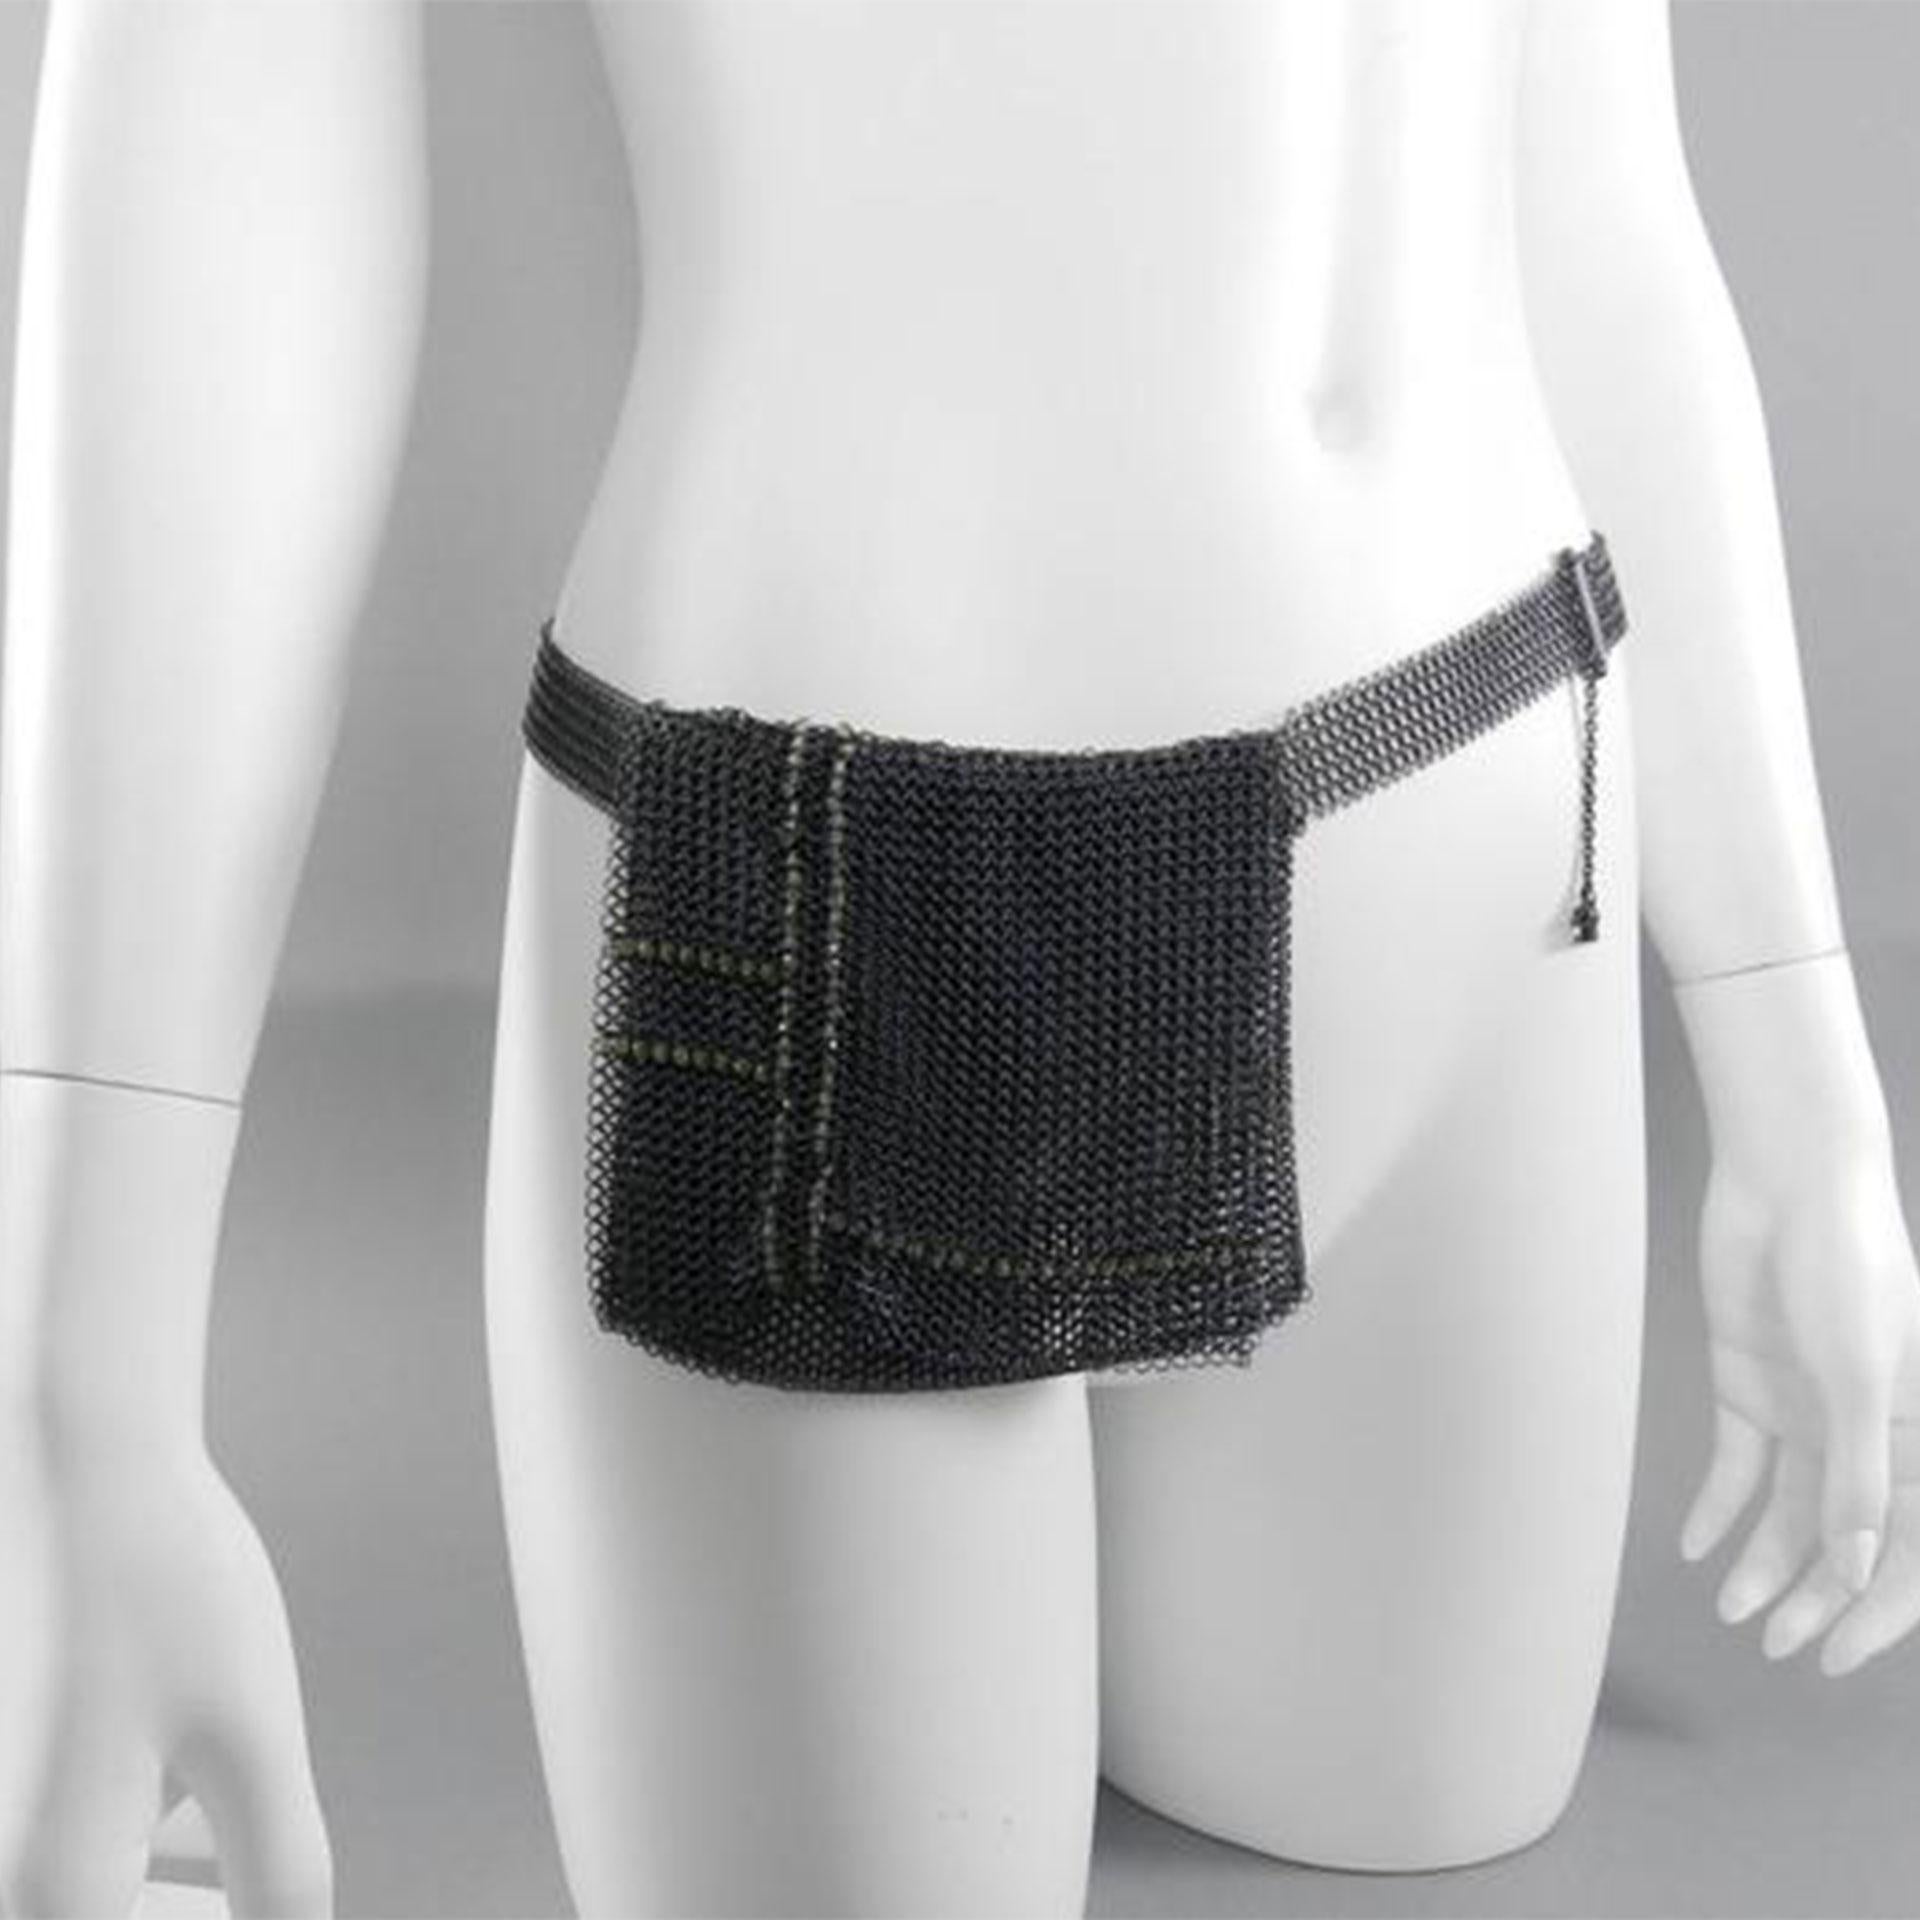 Chanel Vintage 1999 Spring Mesh Chain Belt Bum Waist Bag Fanny Pack

Chanel vintage 1999 Spring runway collection chain mail mesh belt bag. Rare collectible item in excellent condition with no flaws. Mint! The belt fastens at 31.5